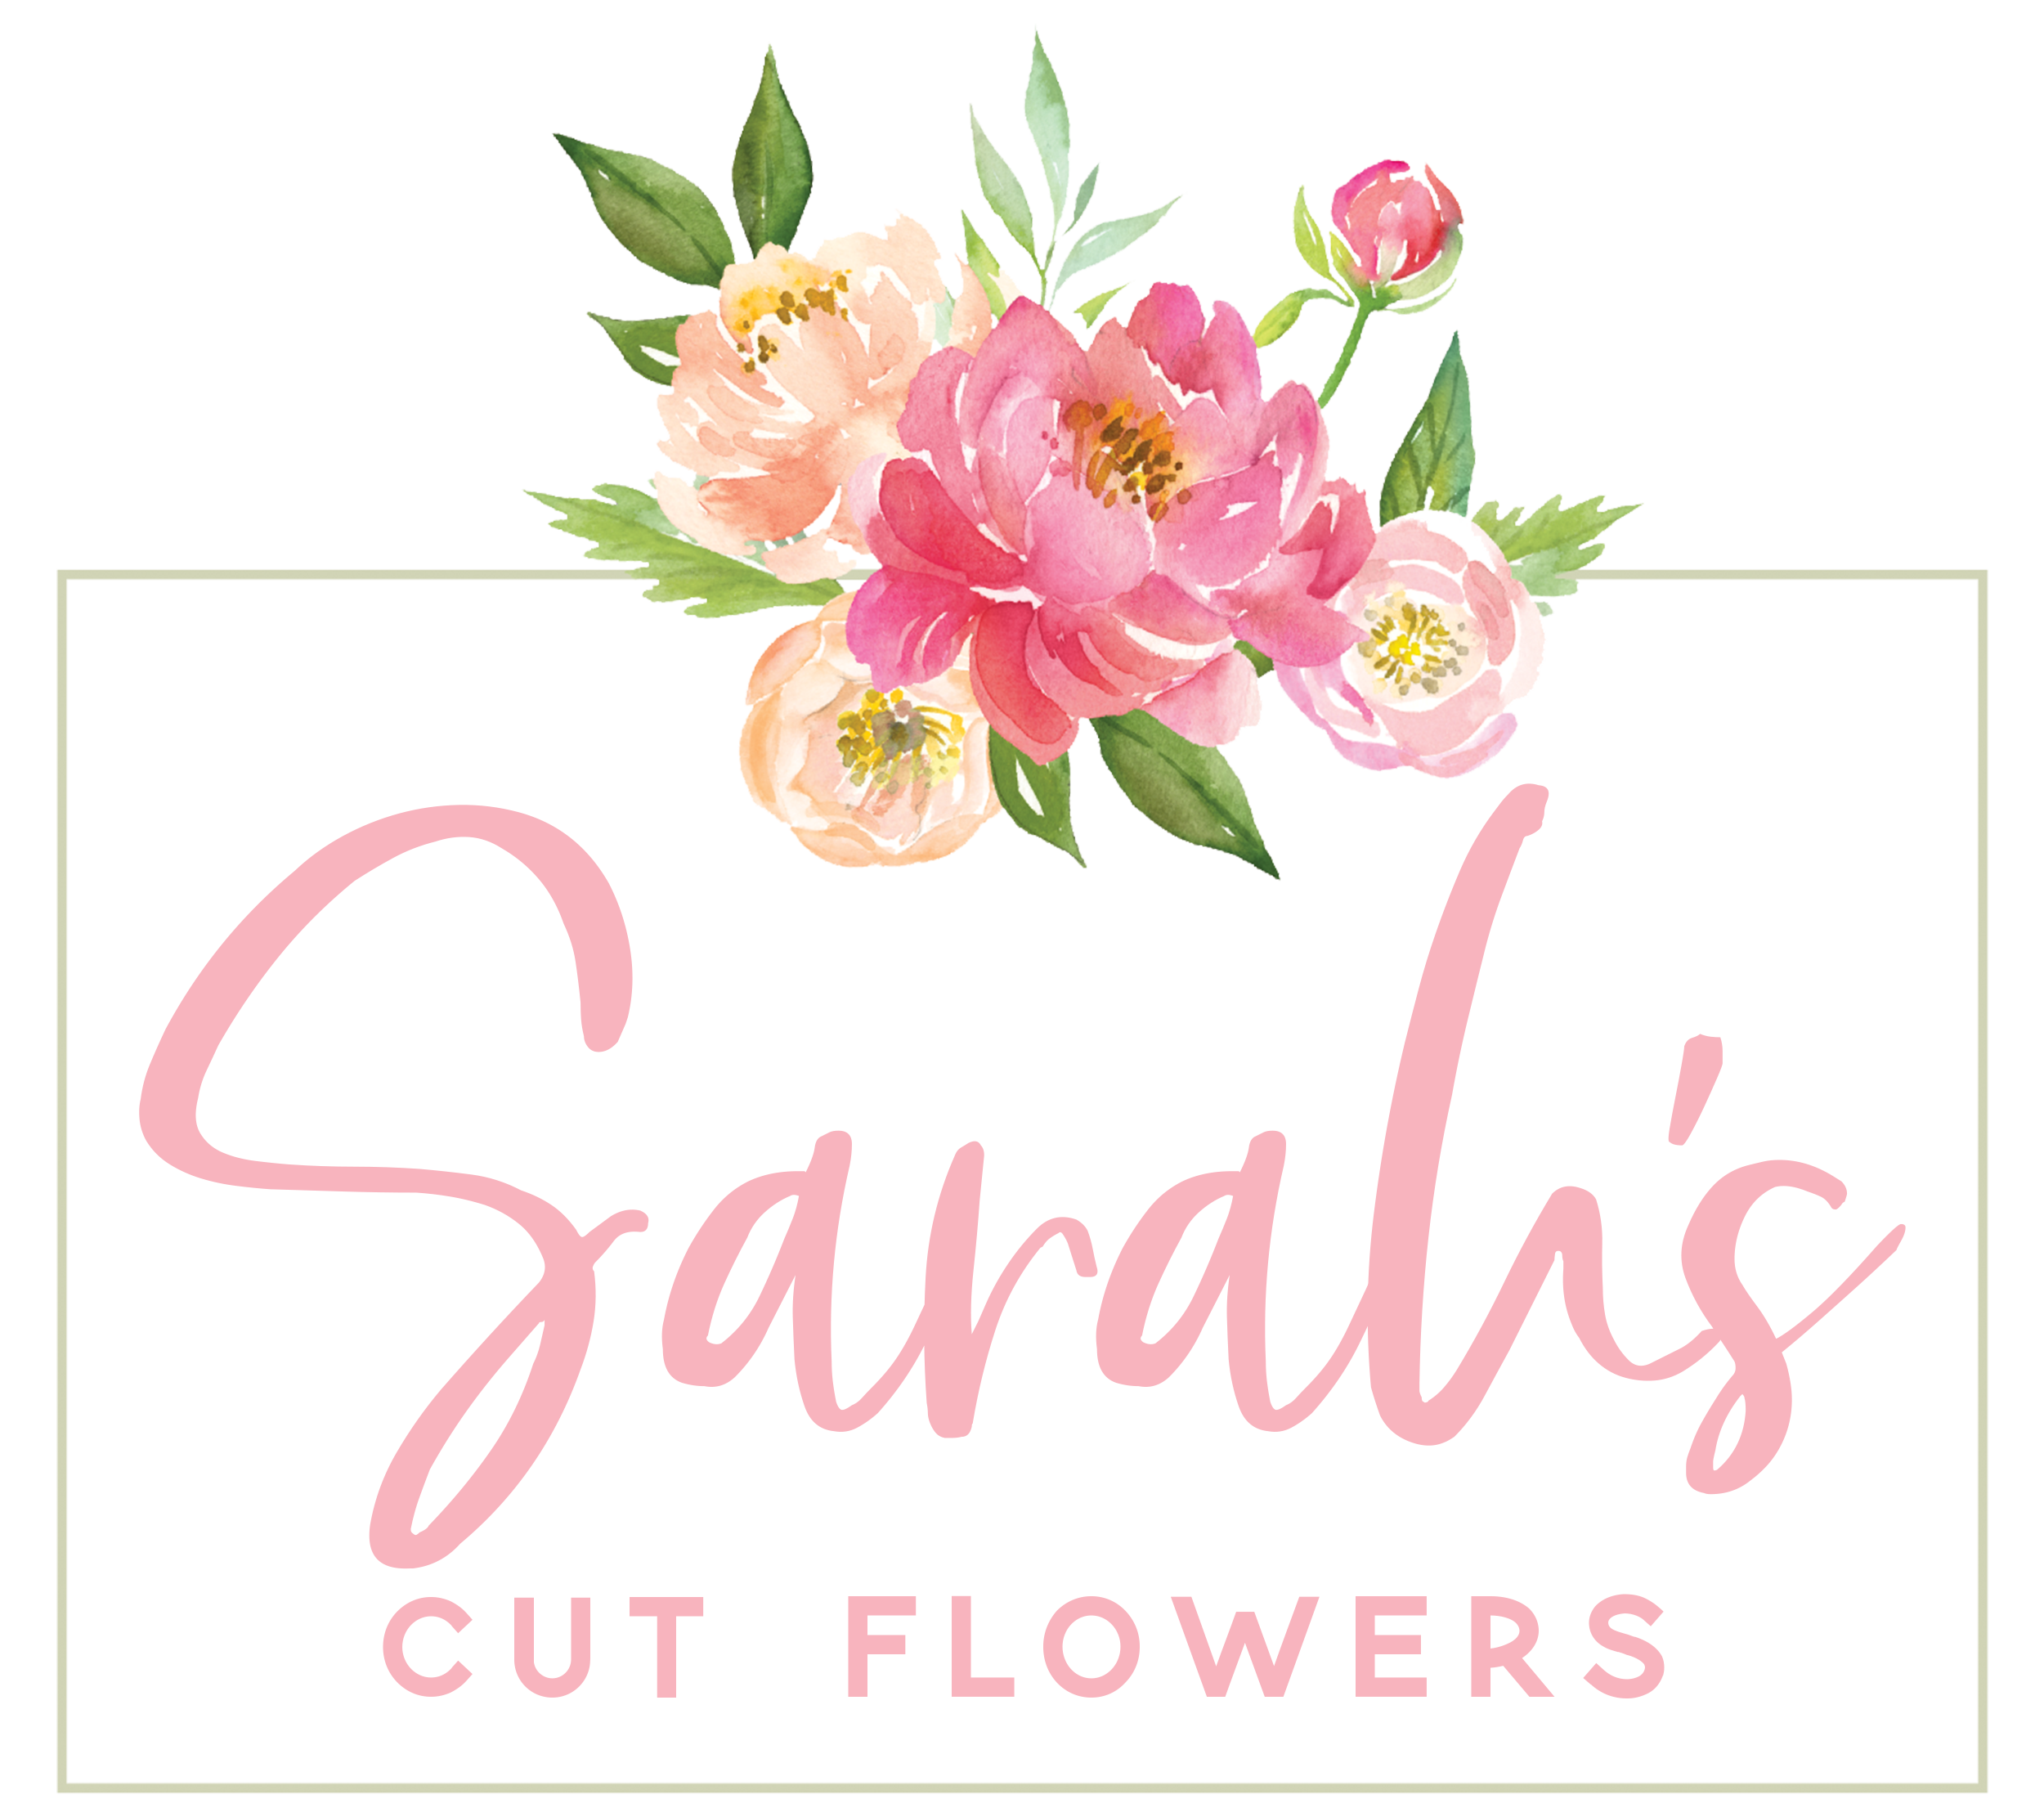 Sarah's Cut Flowers, fresh cut flowers in Wheatland County and Strathmore Alberta